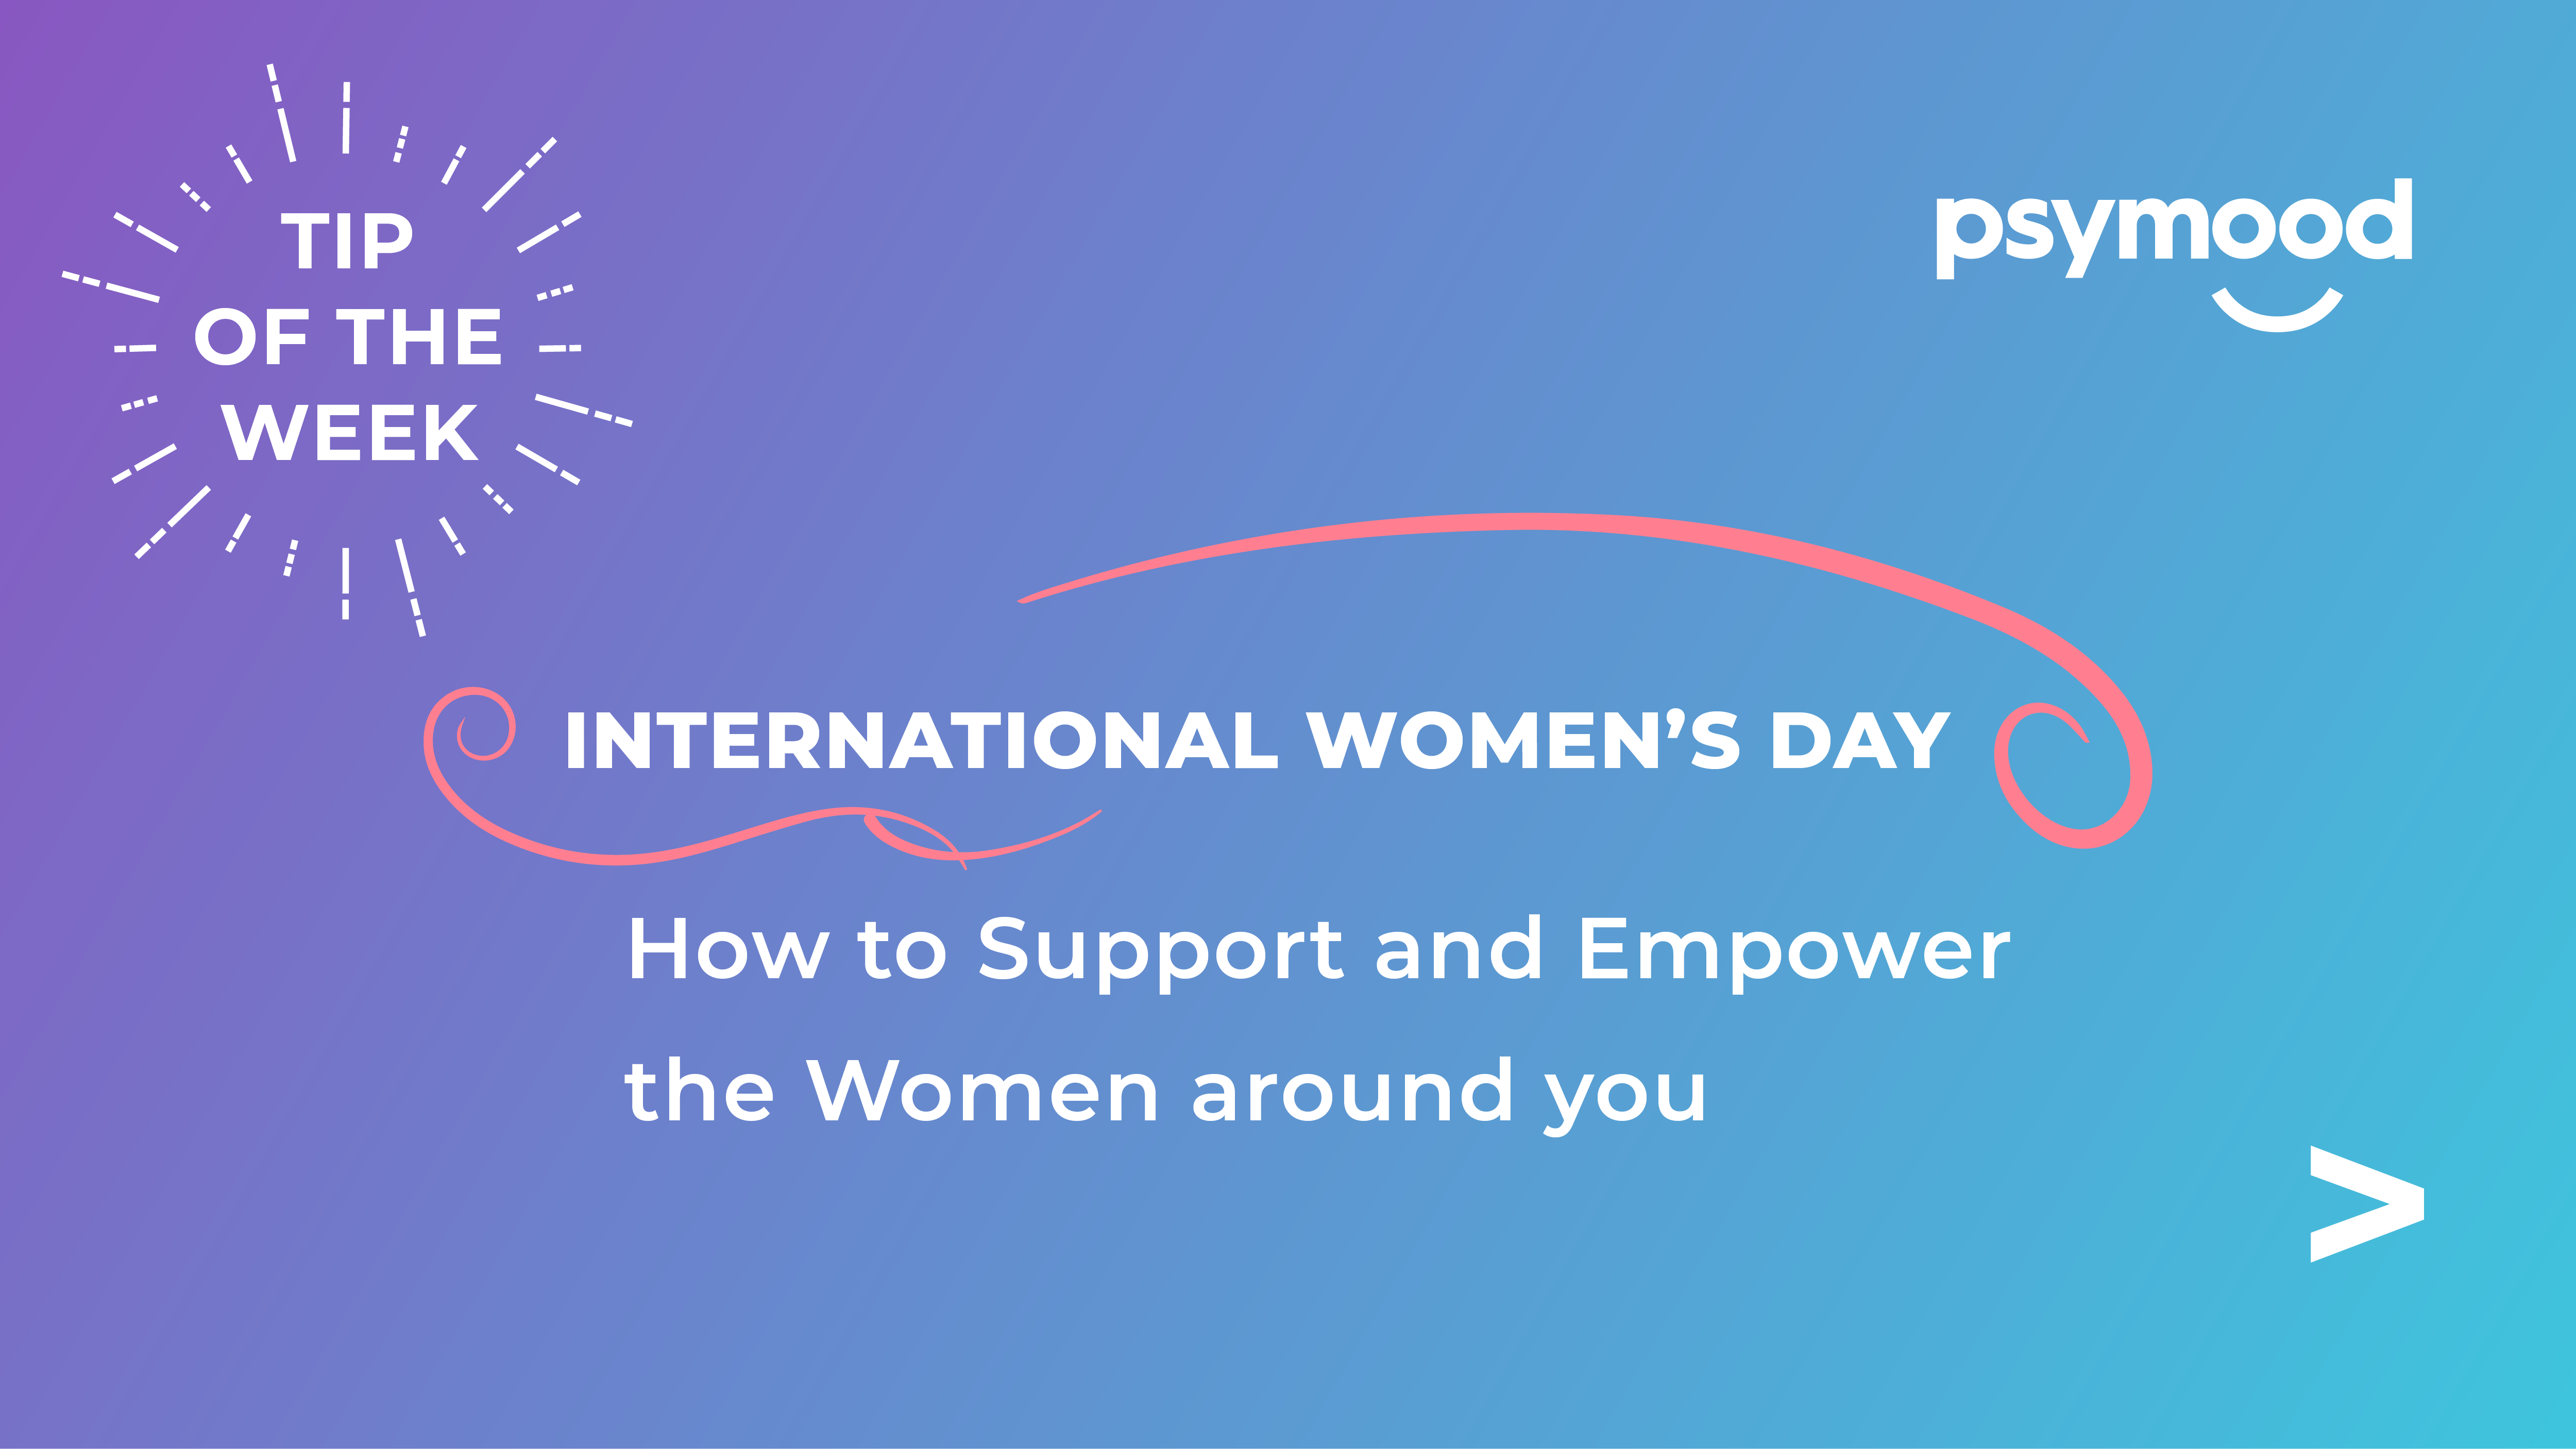 International Women’s Day: How to Support and Empower the Women around you